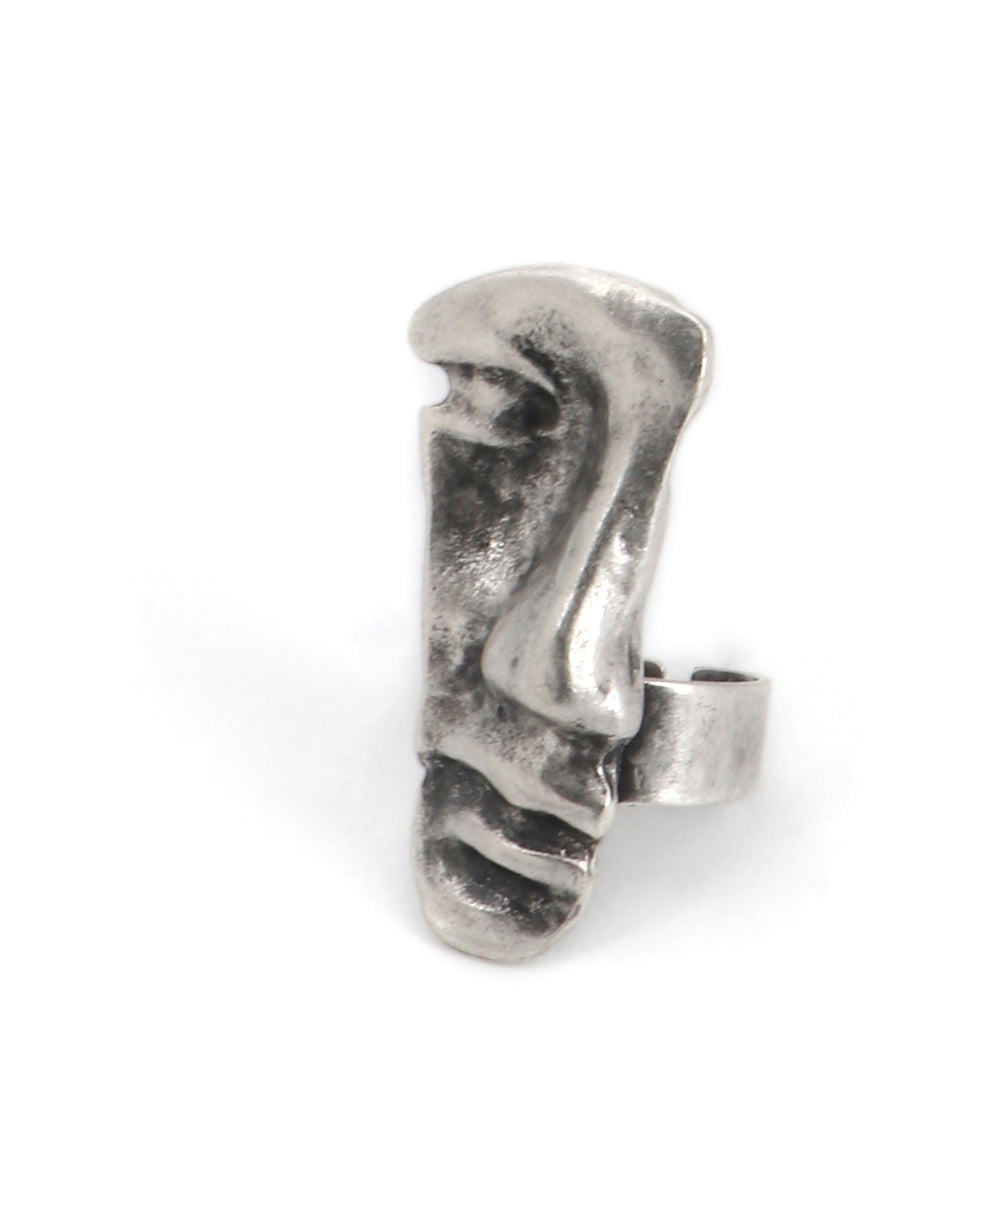 Statement face silhouette ring